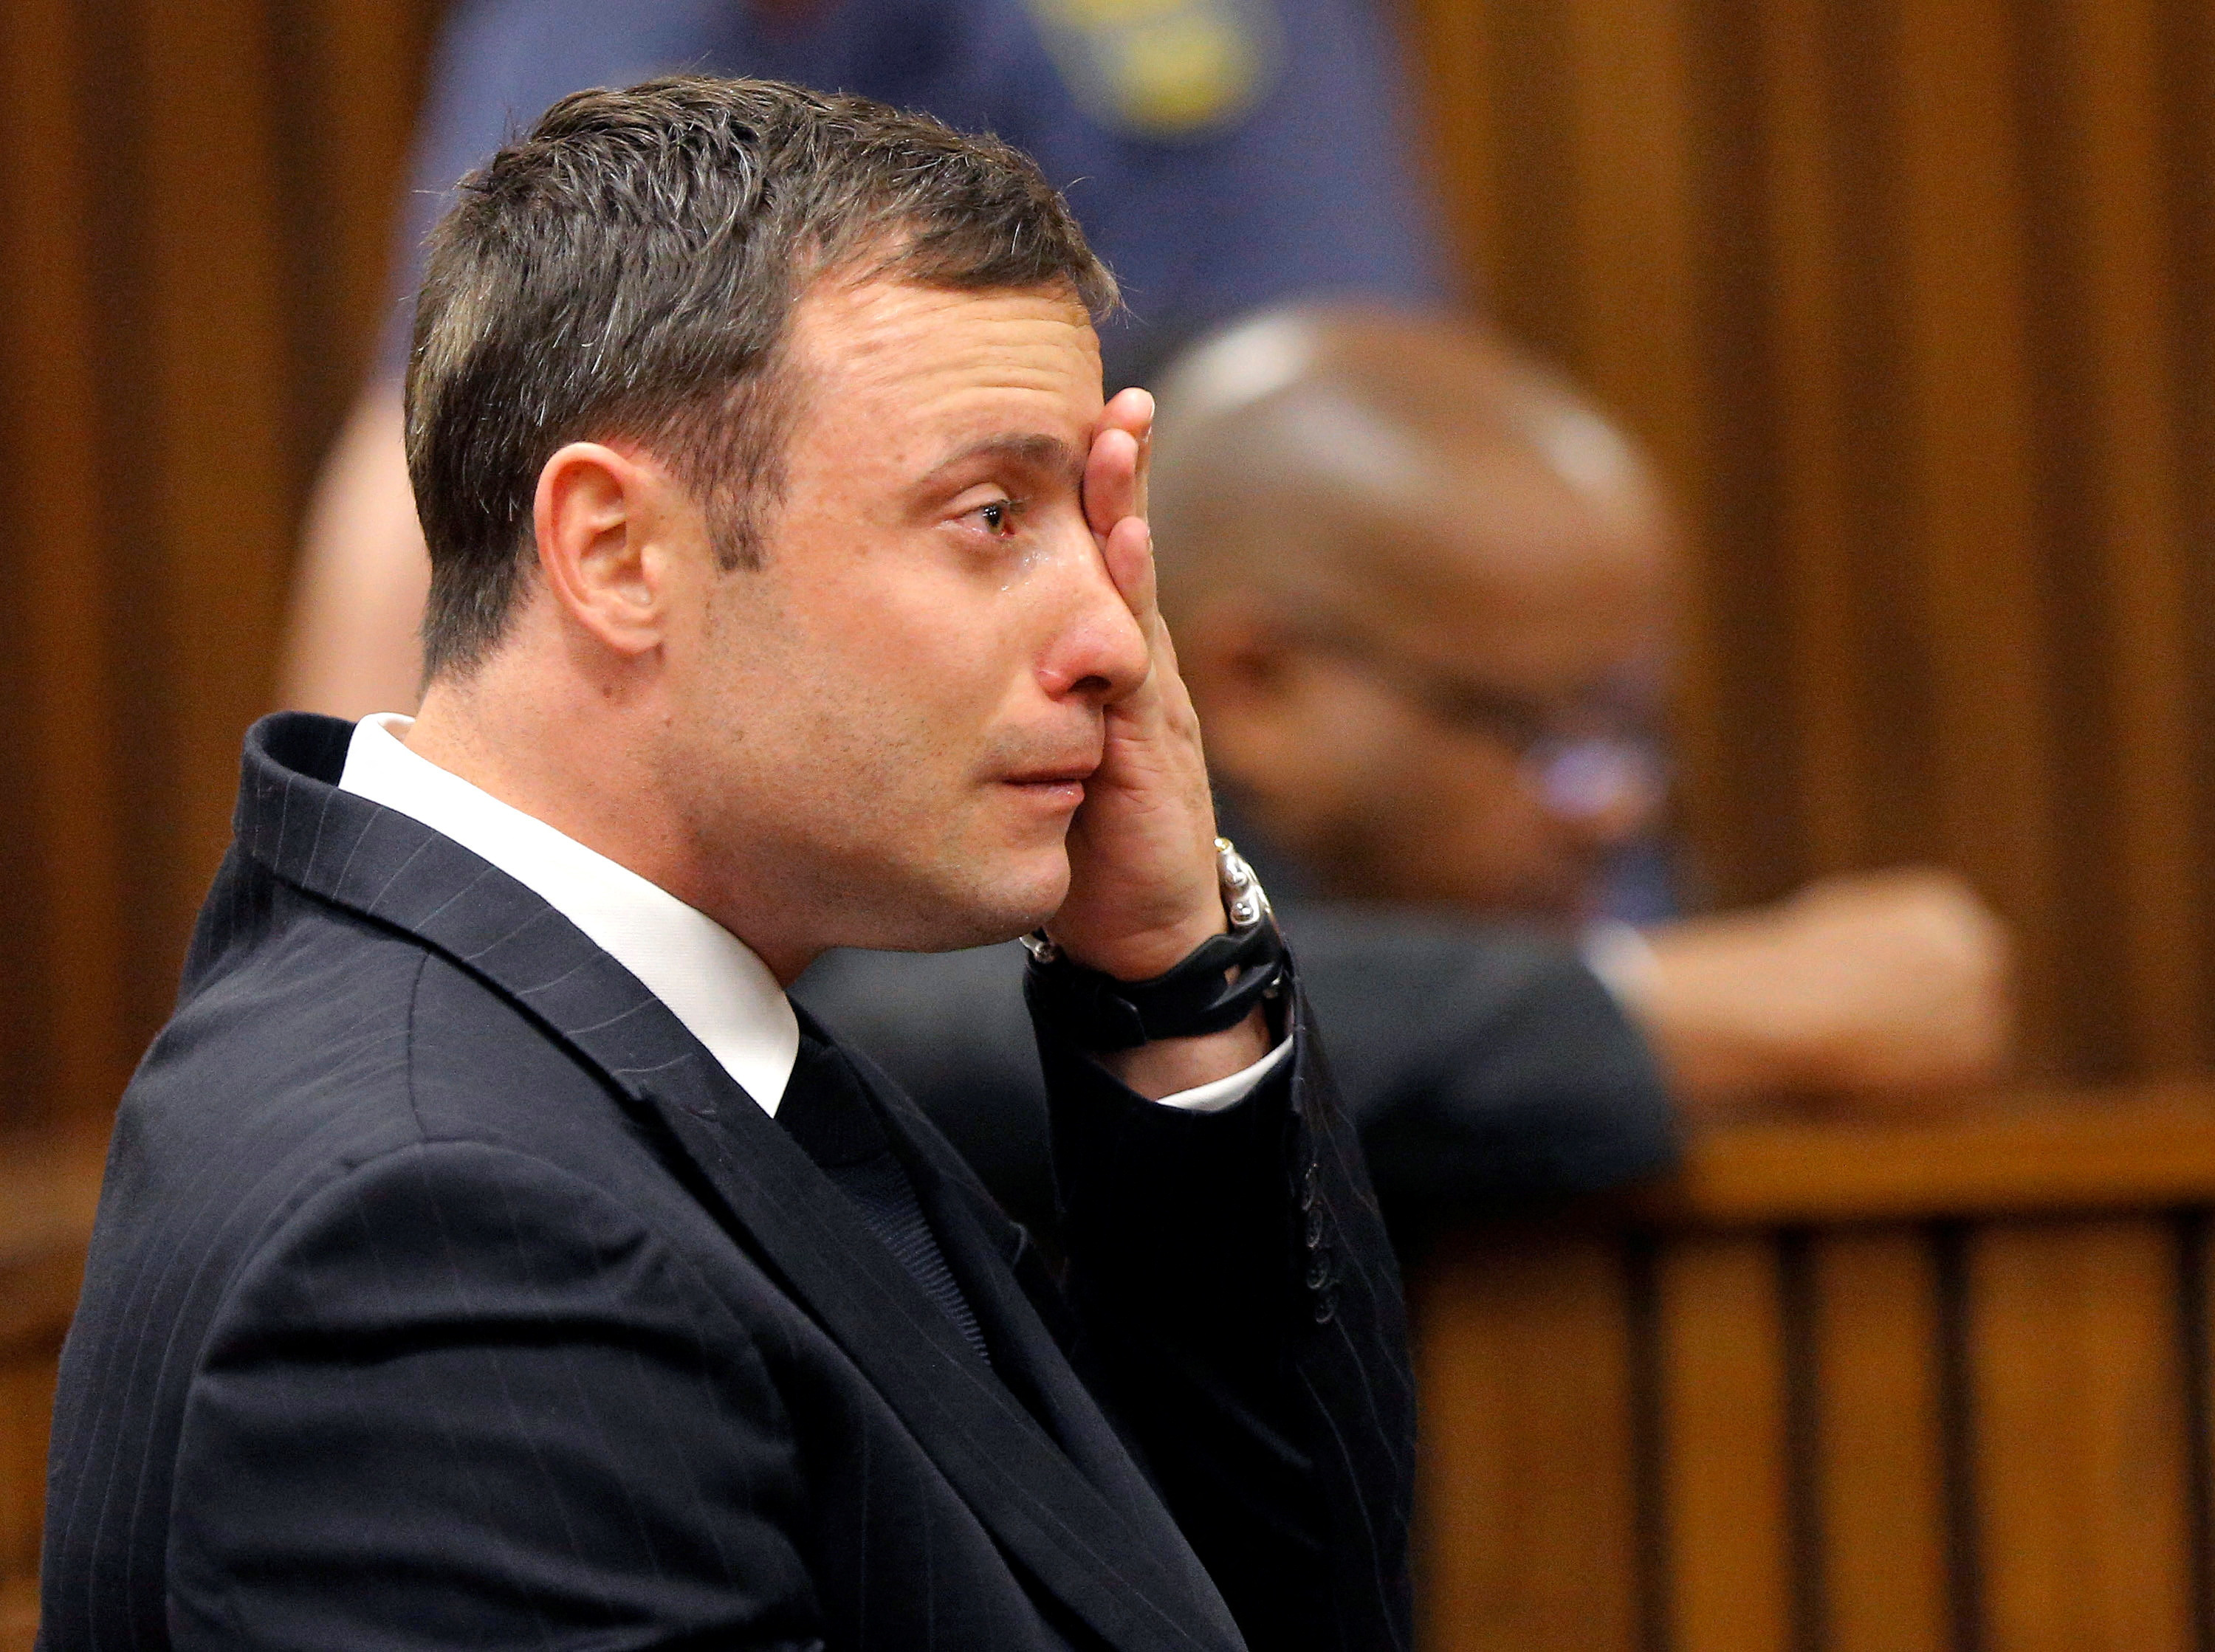 Olympic and Paralympic track star Pistorius reacts as he listens to Judge Masipa's judgement at the North Gauteng High Court in Pretoria